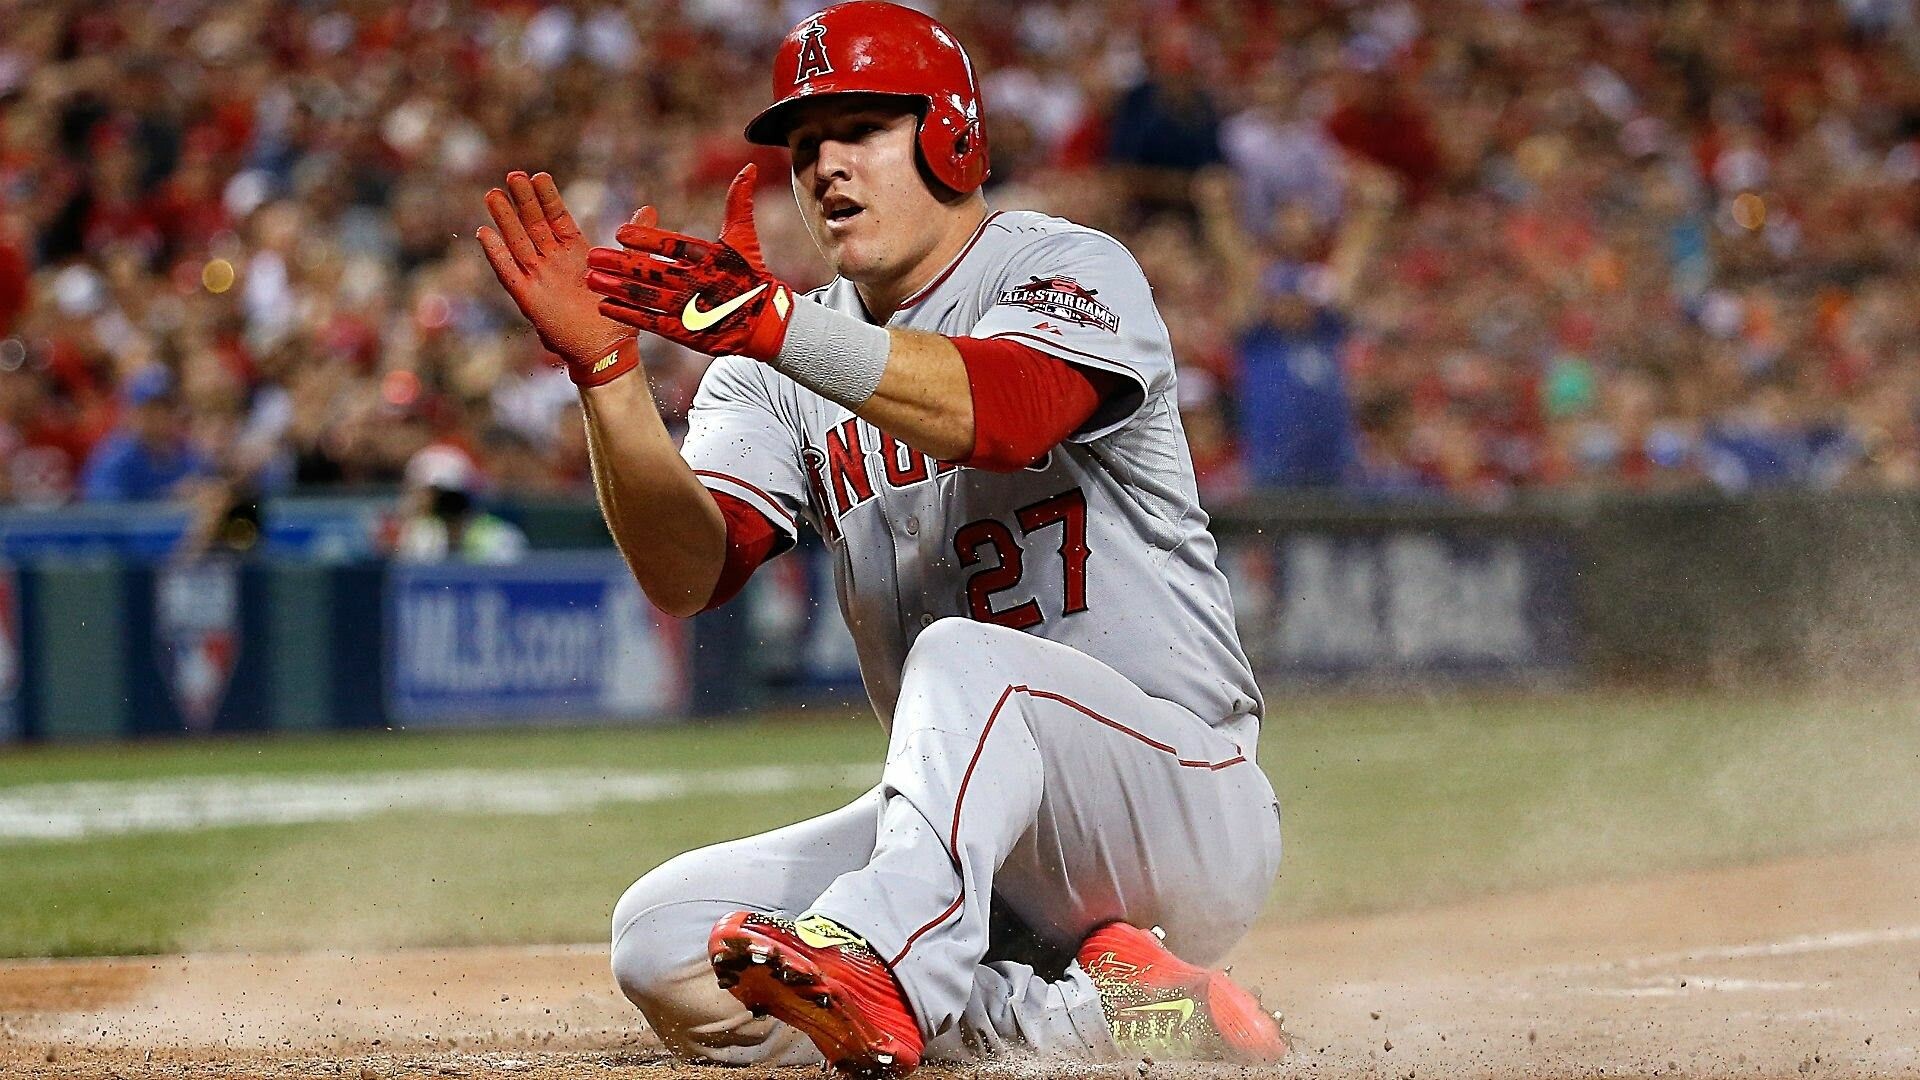 Mike Trout: The winner of the 2012 AL Rookie of the Year Award, Baseball. 1920x1080 Full HD Background.